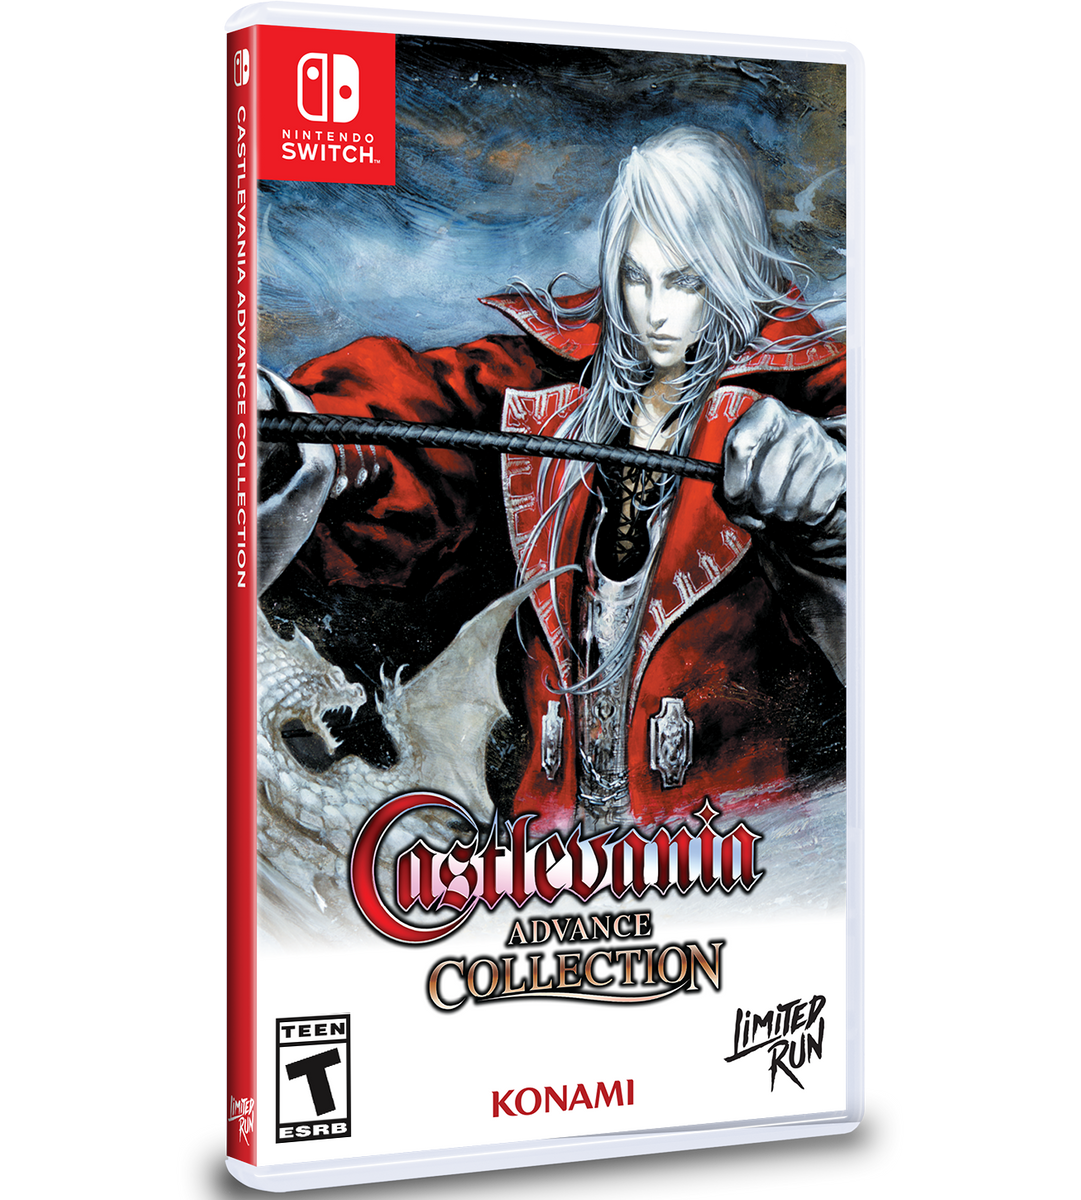 Castlevania Advance Collection for Nintendo Switch - Nintendo Official Site